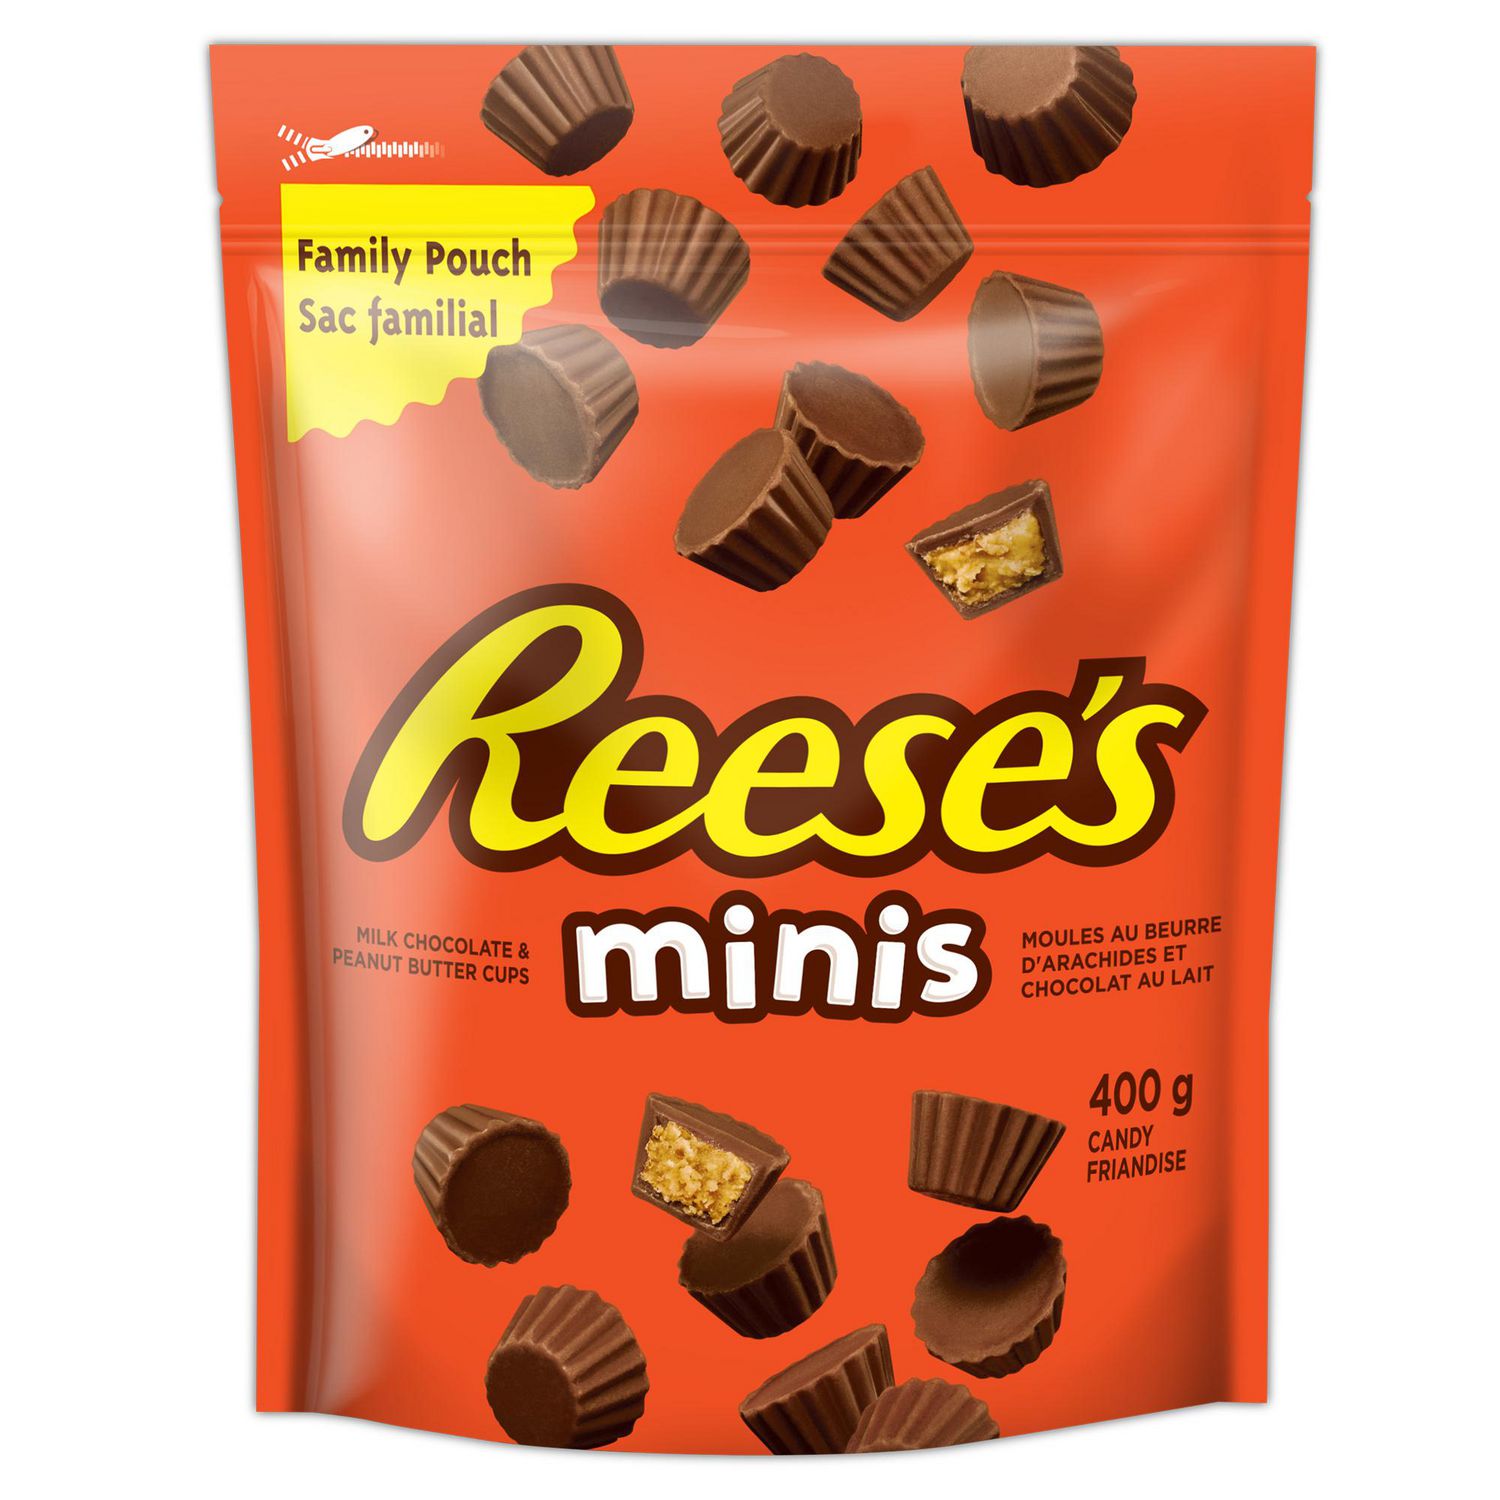 REESE Minis PEANUT BUTTER CUPS Candy | Walmart Canada